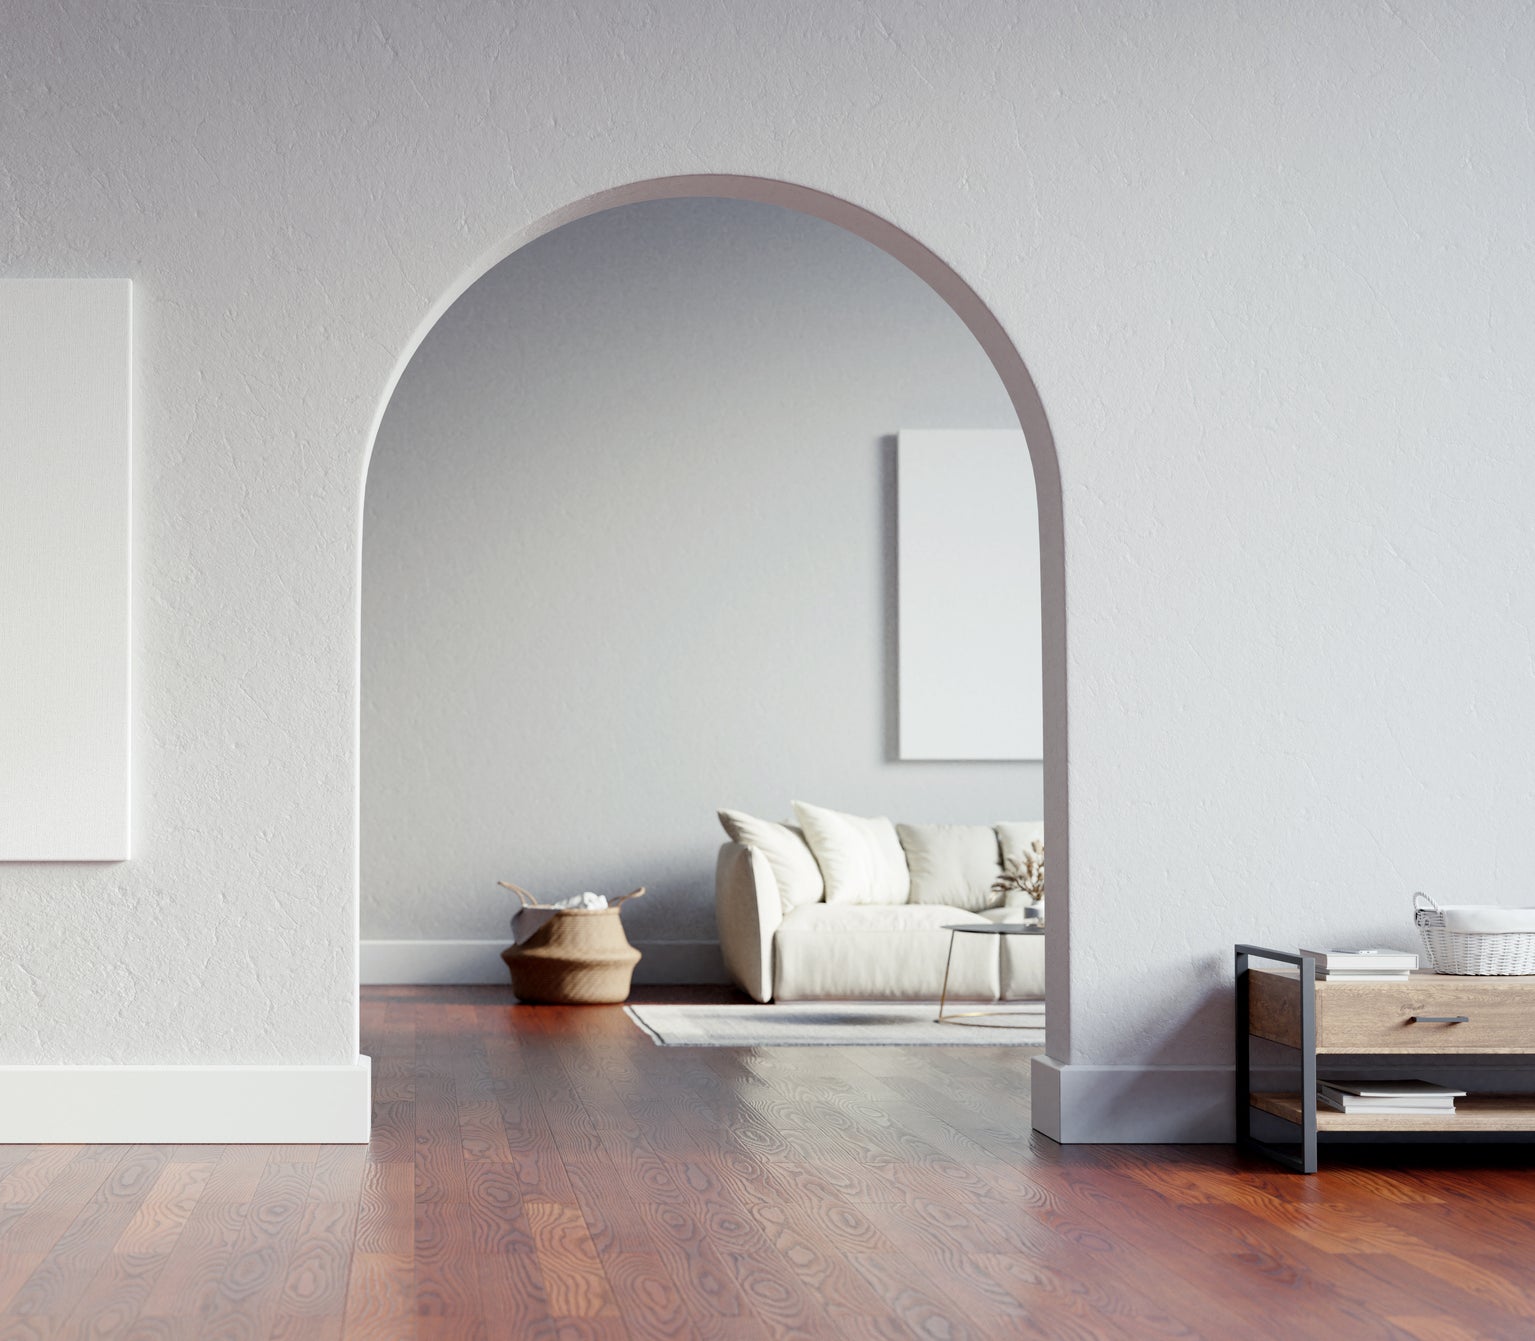 A minimalist room with an empty picture frame on the wall and a simple furnished living area through an archway